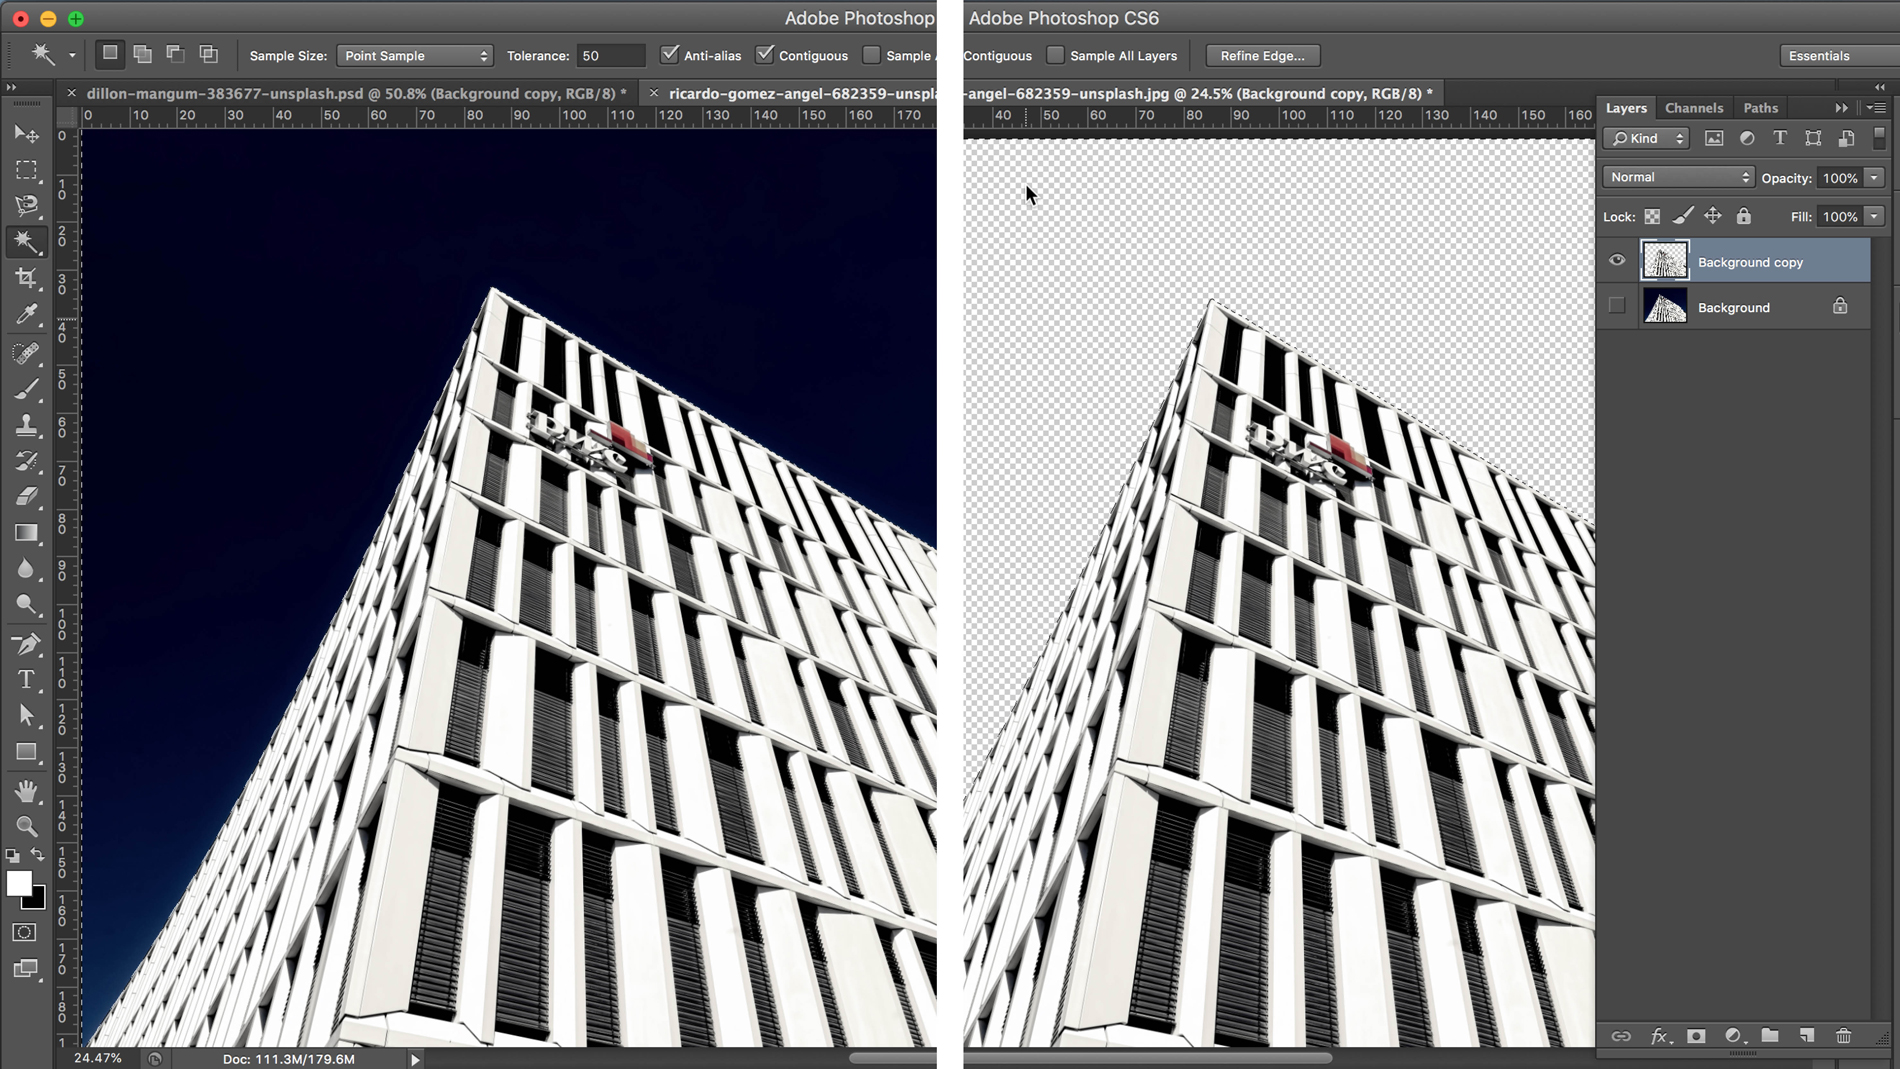 Screenshot of building with background removed in Photoshop